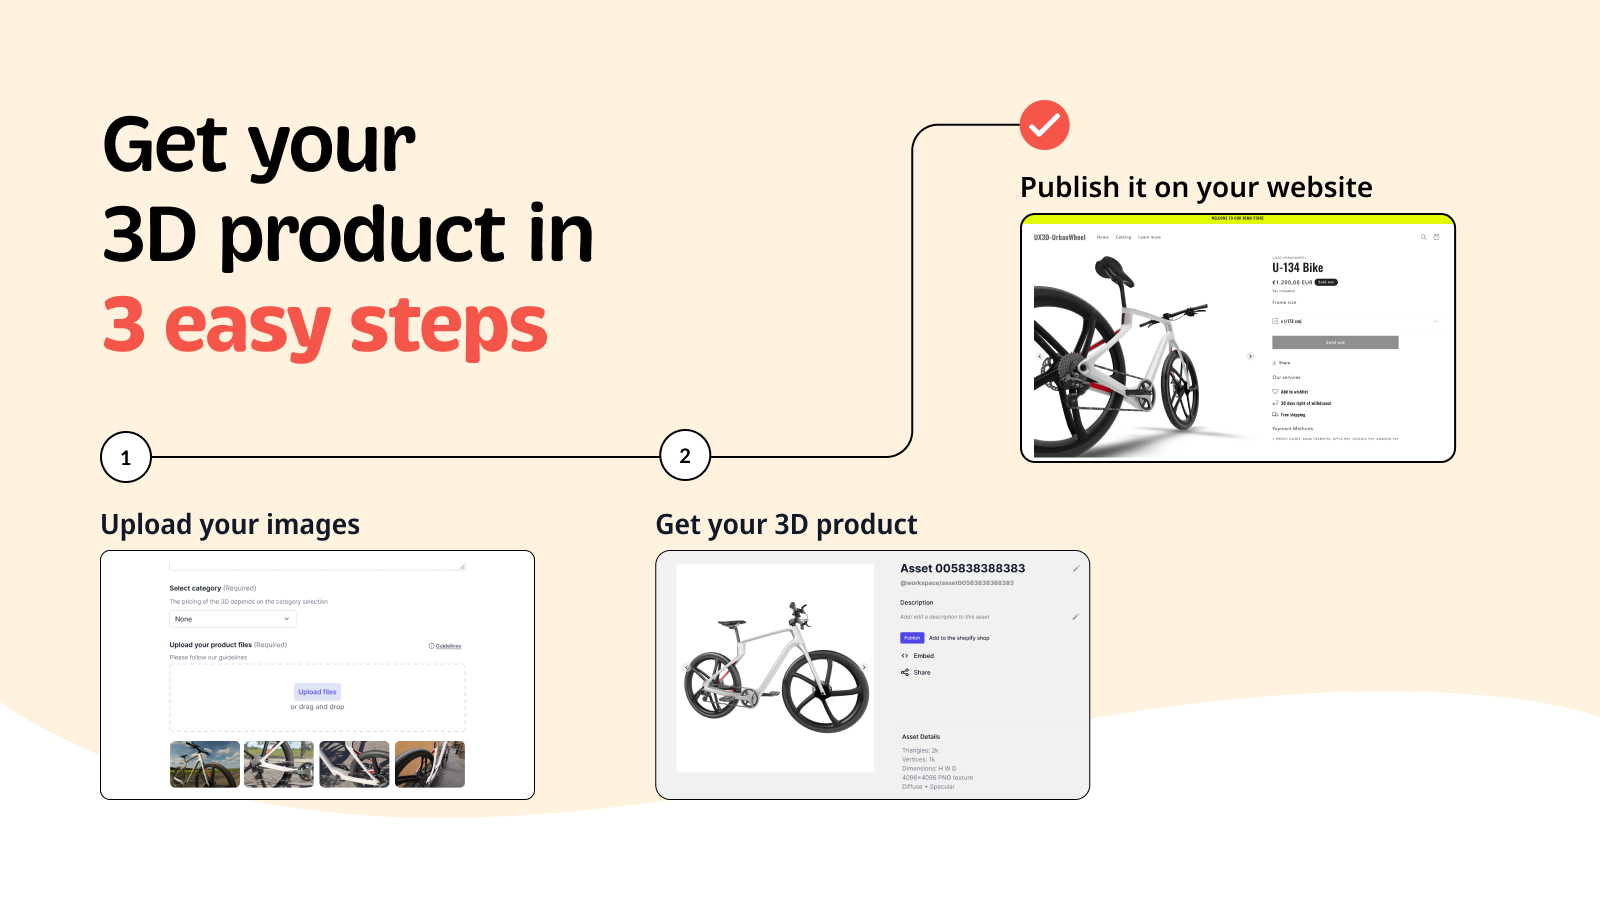 Get your 3D product in 3 easy steps